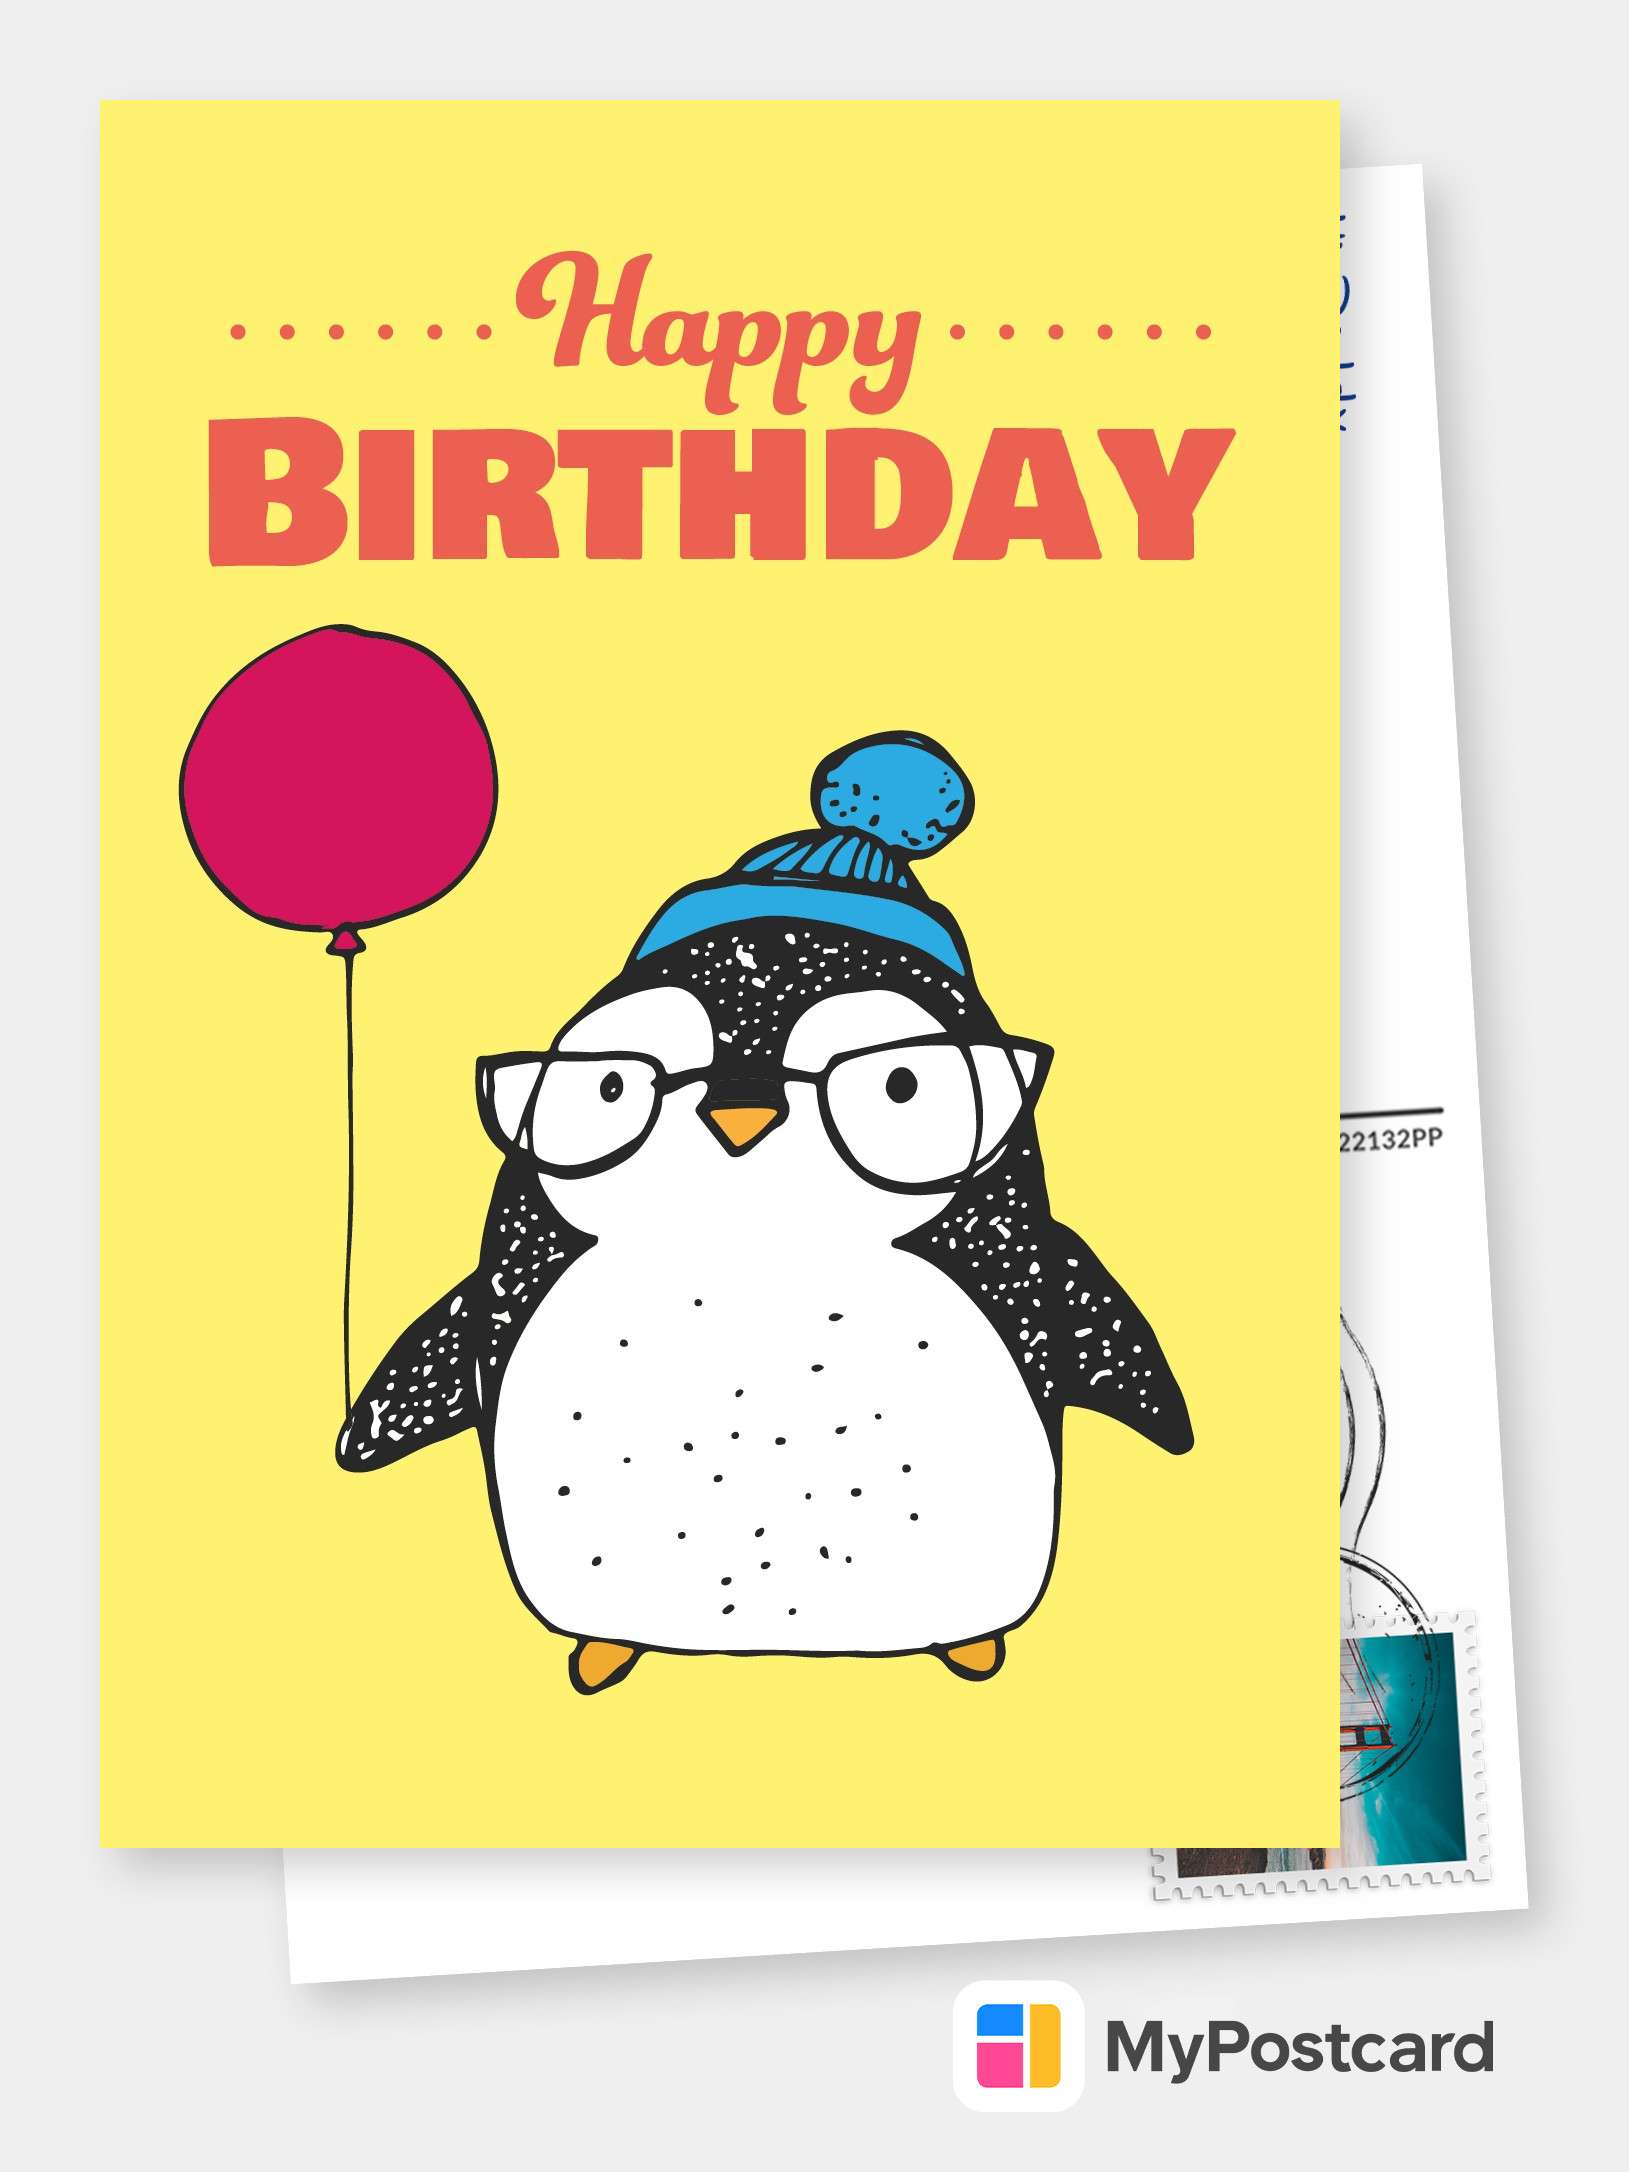 Make Your own Birthday Cards Online